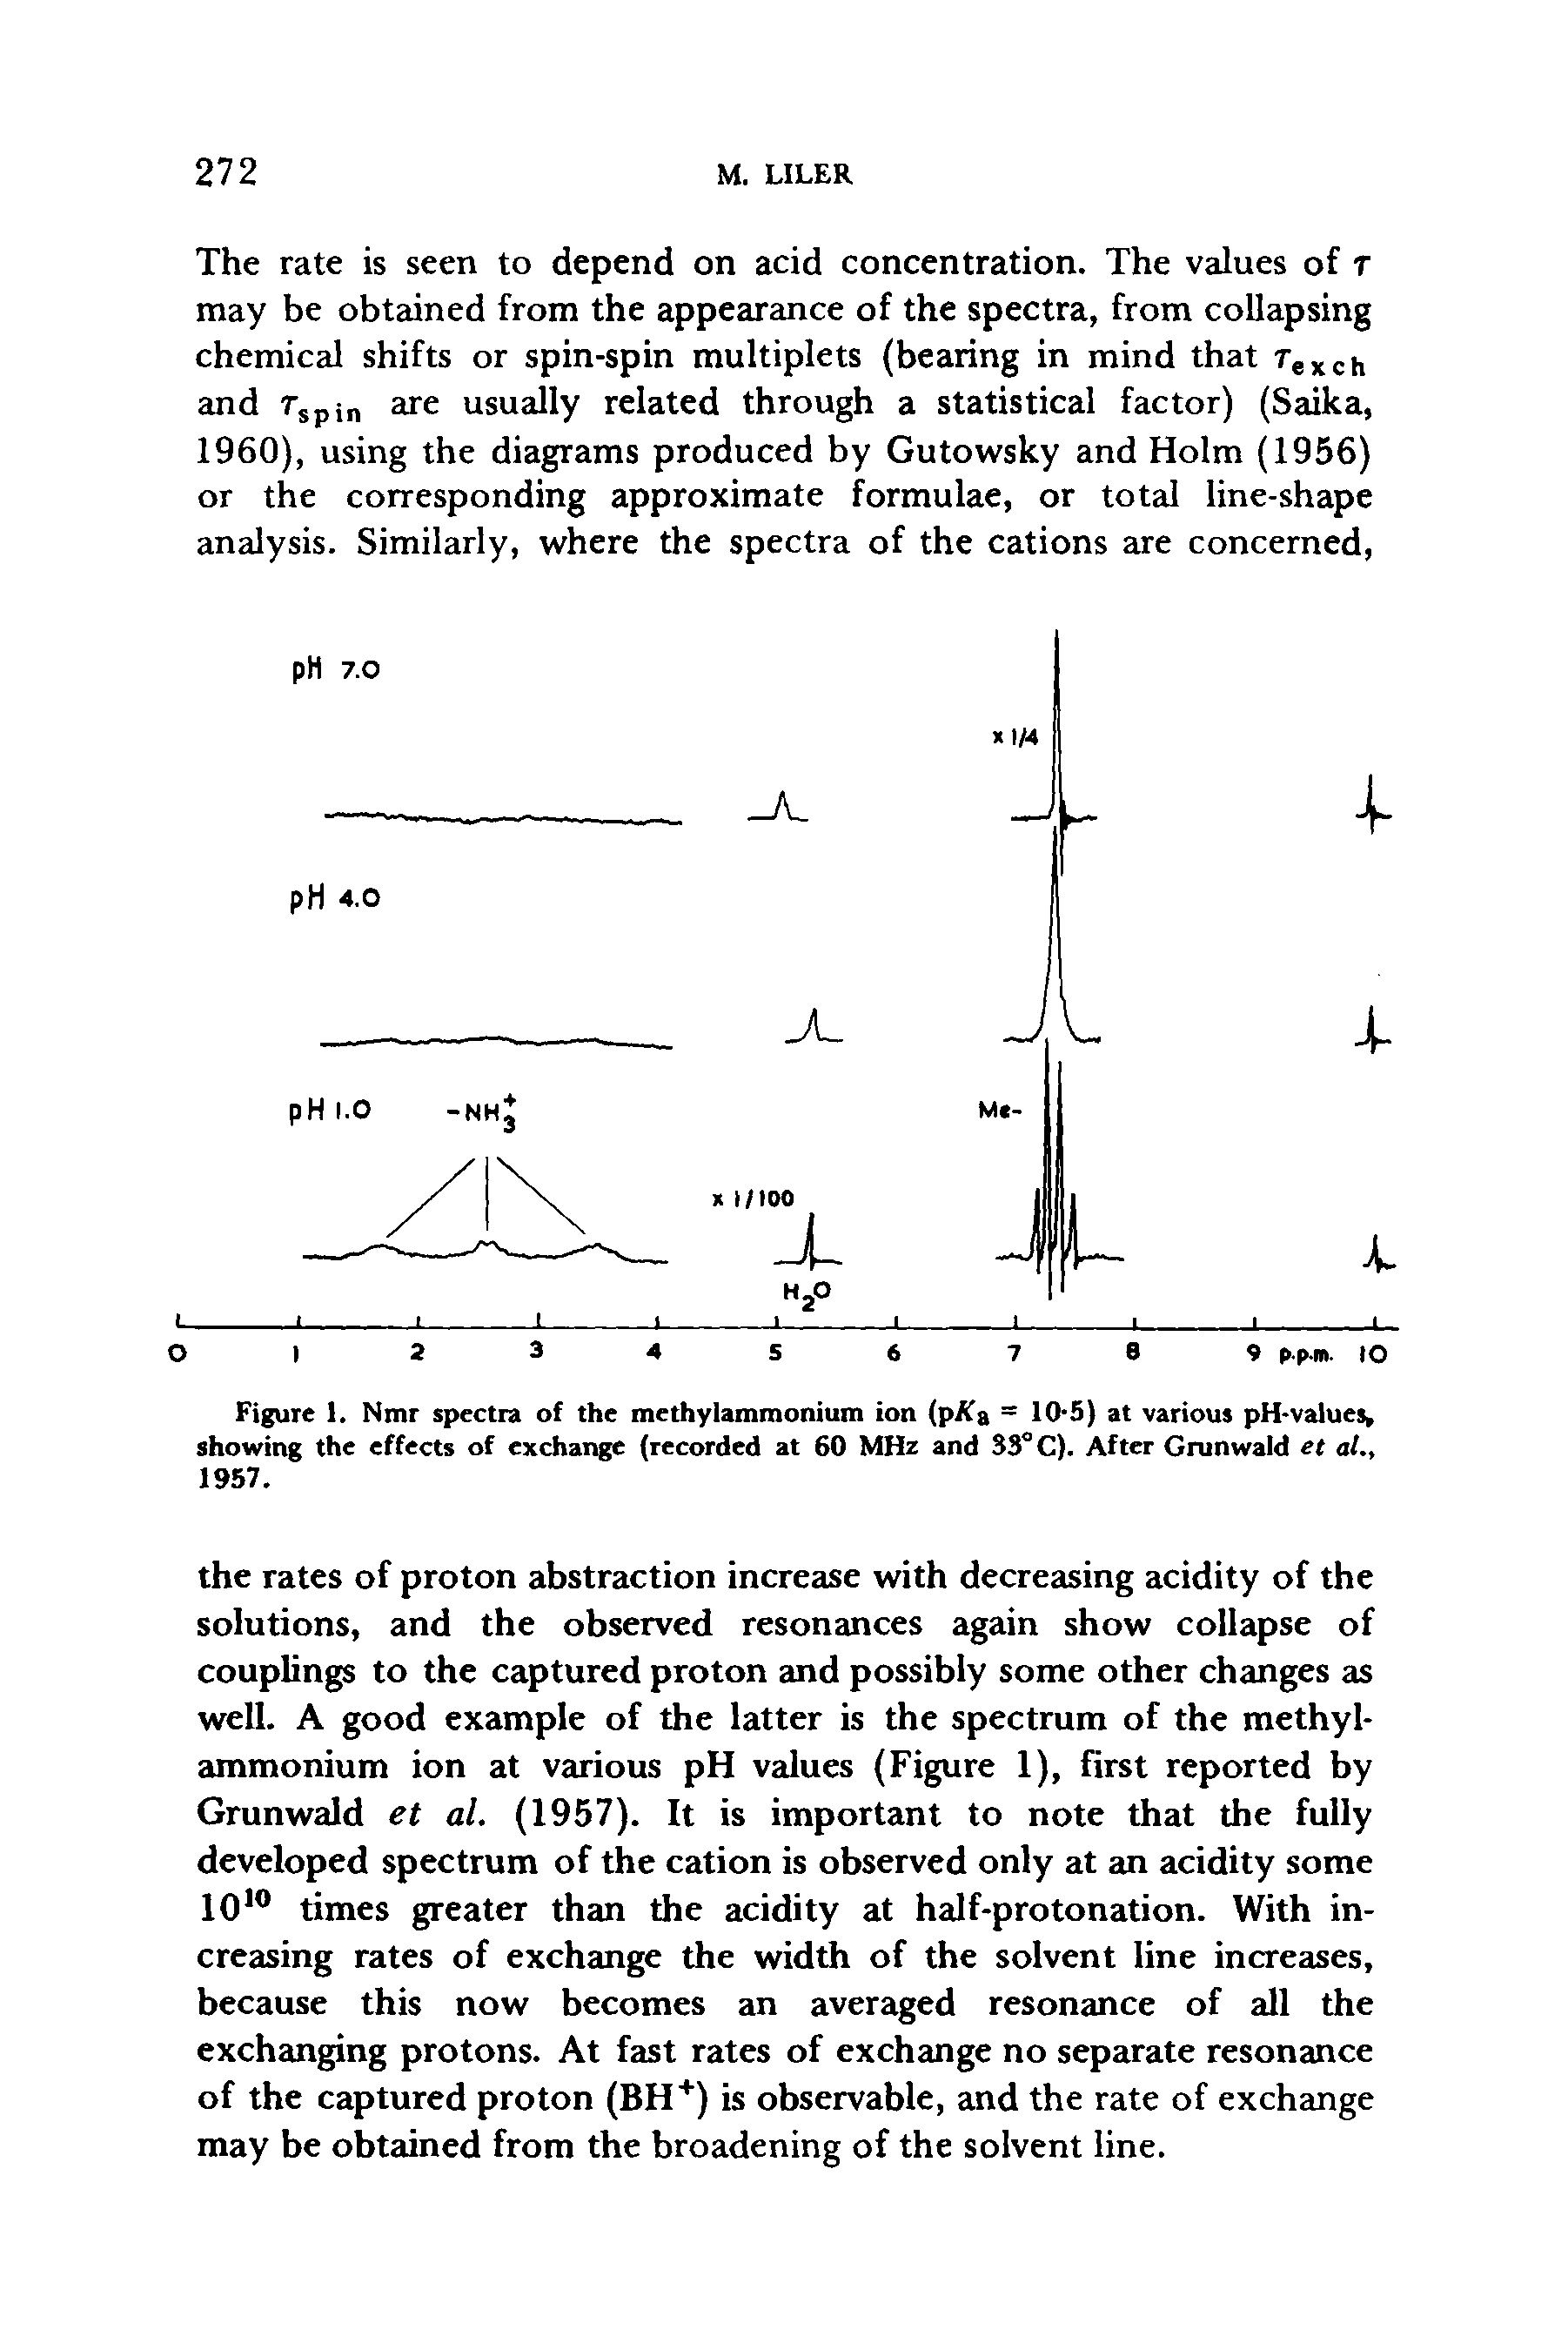 Figure 1. Nmr spectra of the methylammonium ion (p/ta = 10 5) at various pH-values, showing the effects of exchange (recorded at 60 MHz and S3°C). After Grunwald et at., 1957.